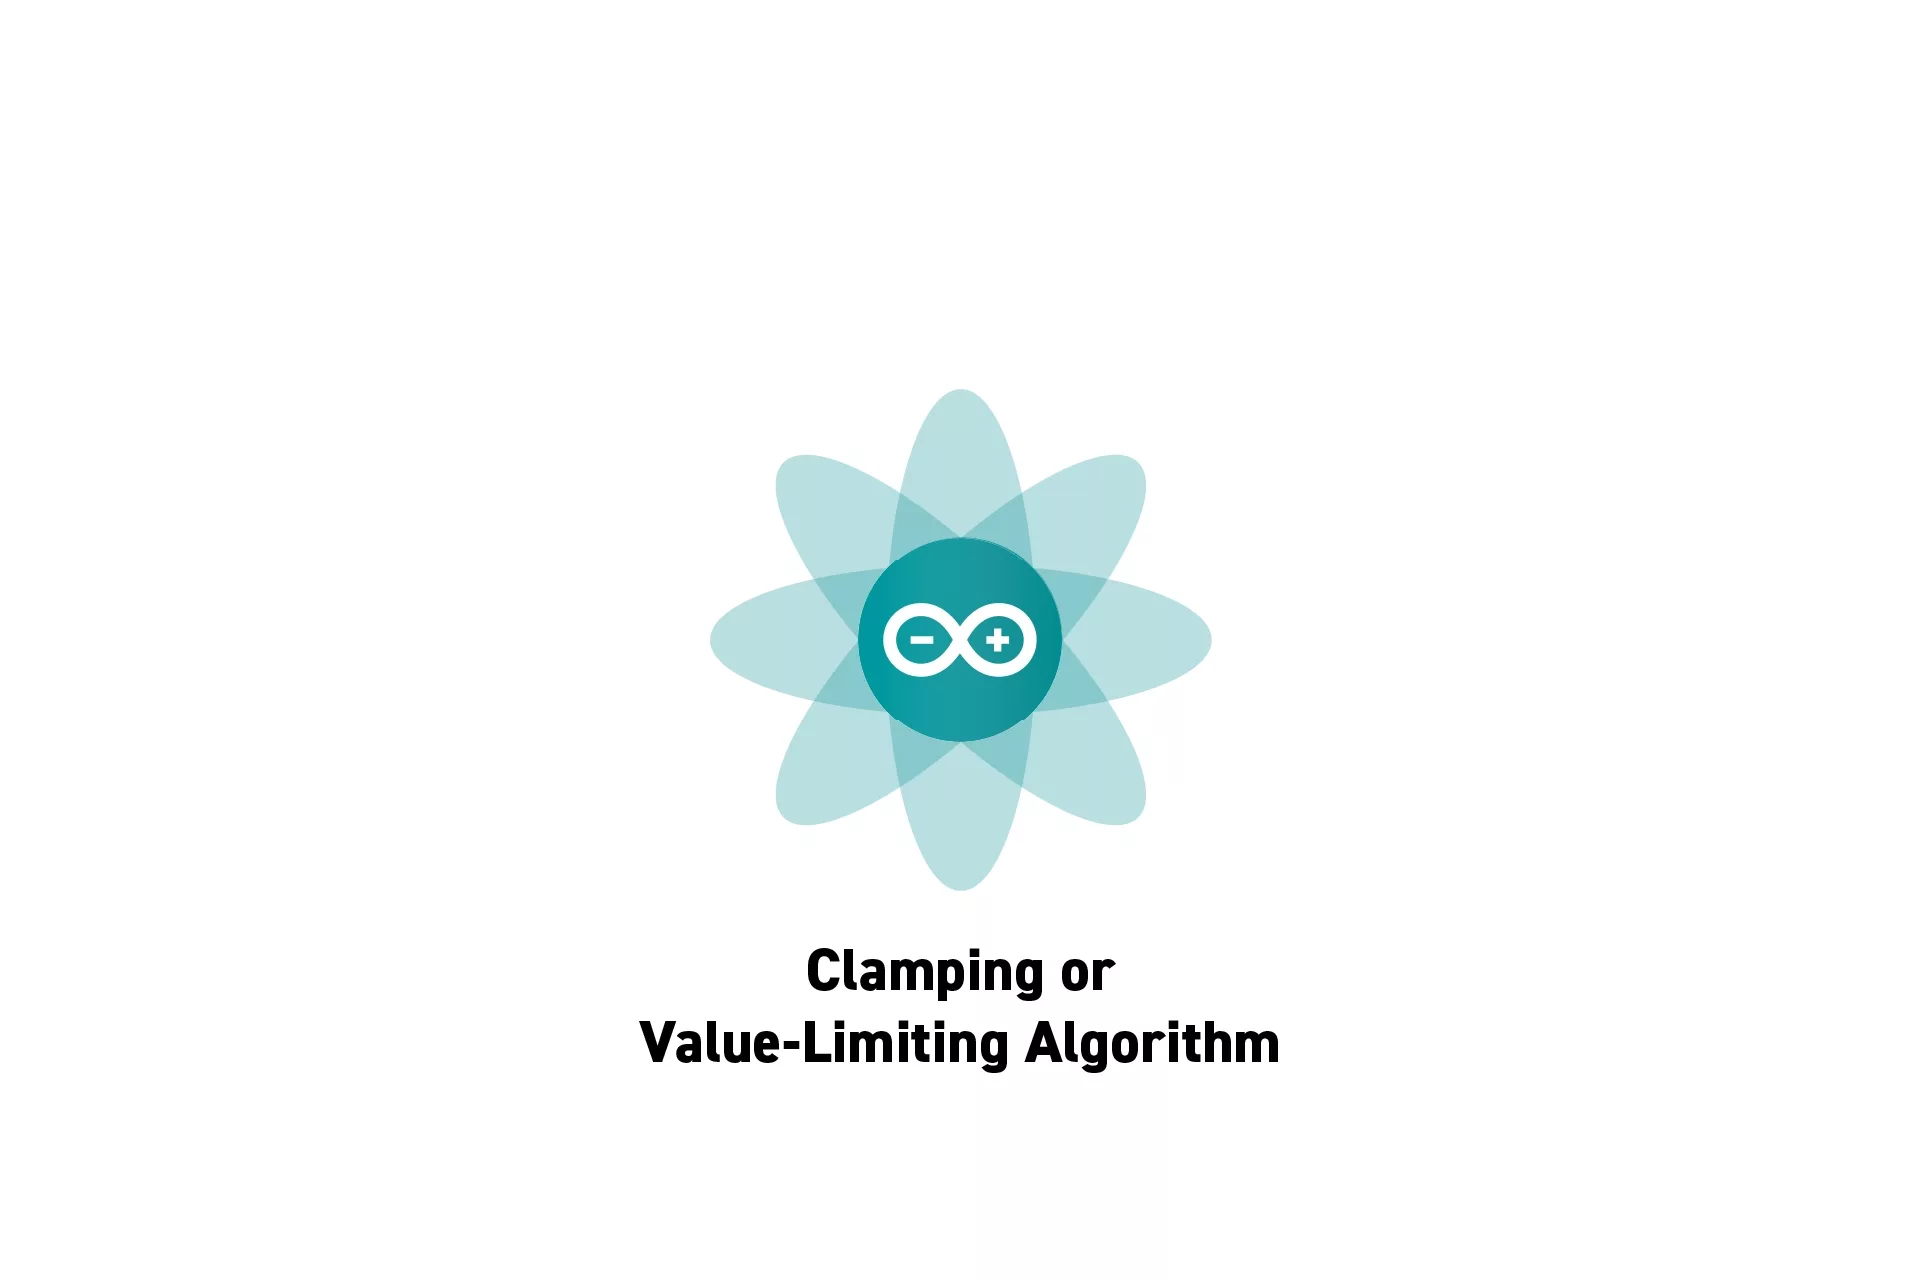 A flower that represents Arduino with the text "Clamping or Value-Limiting Algorithm" beneath it.